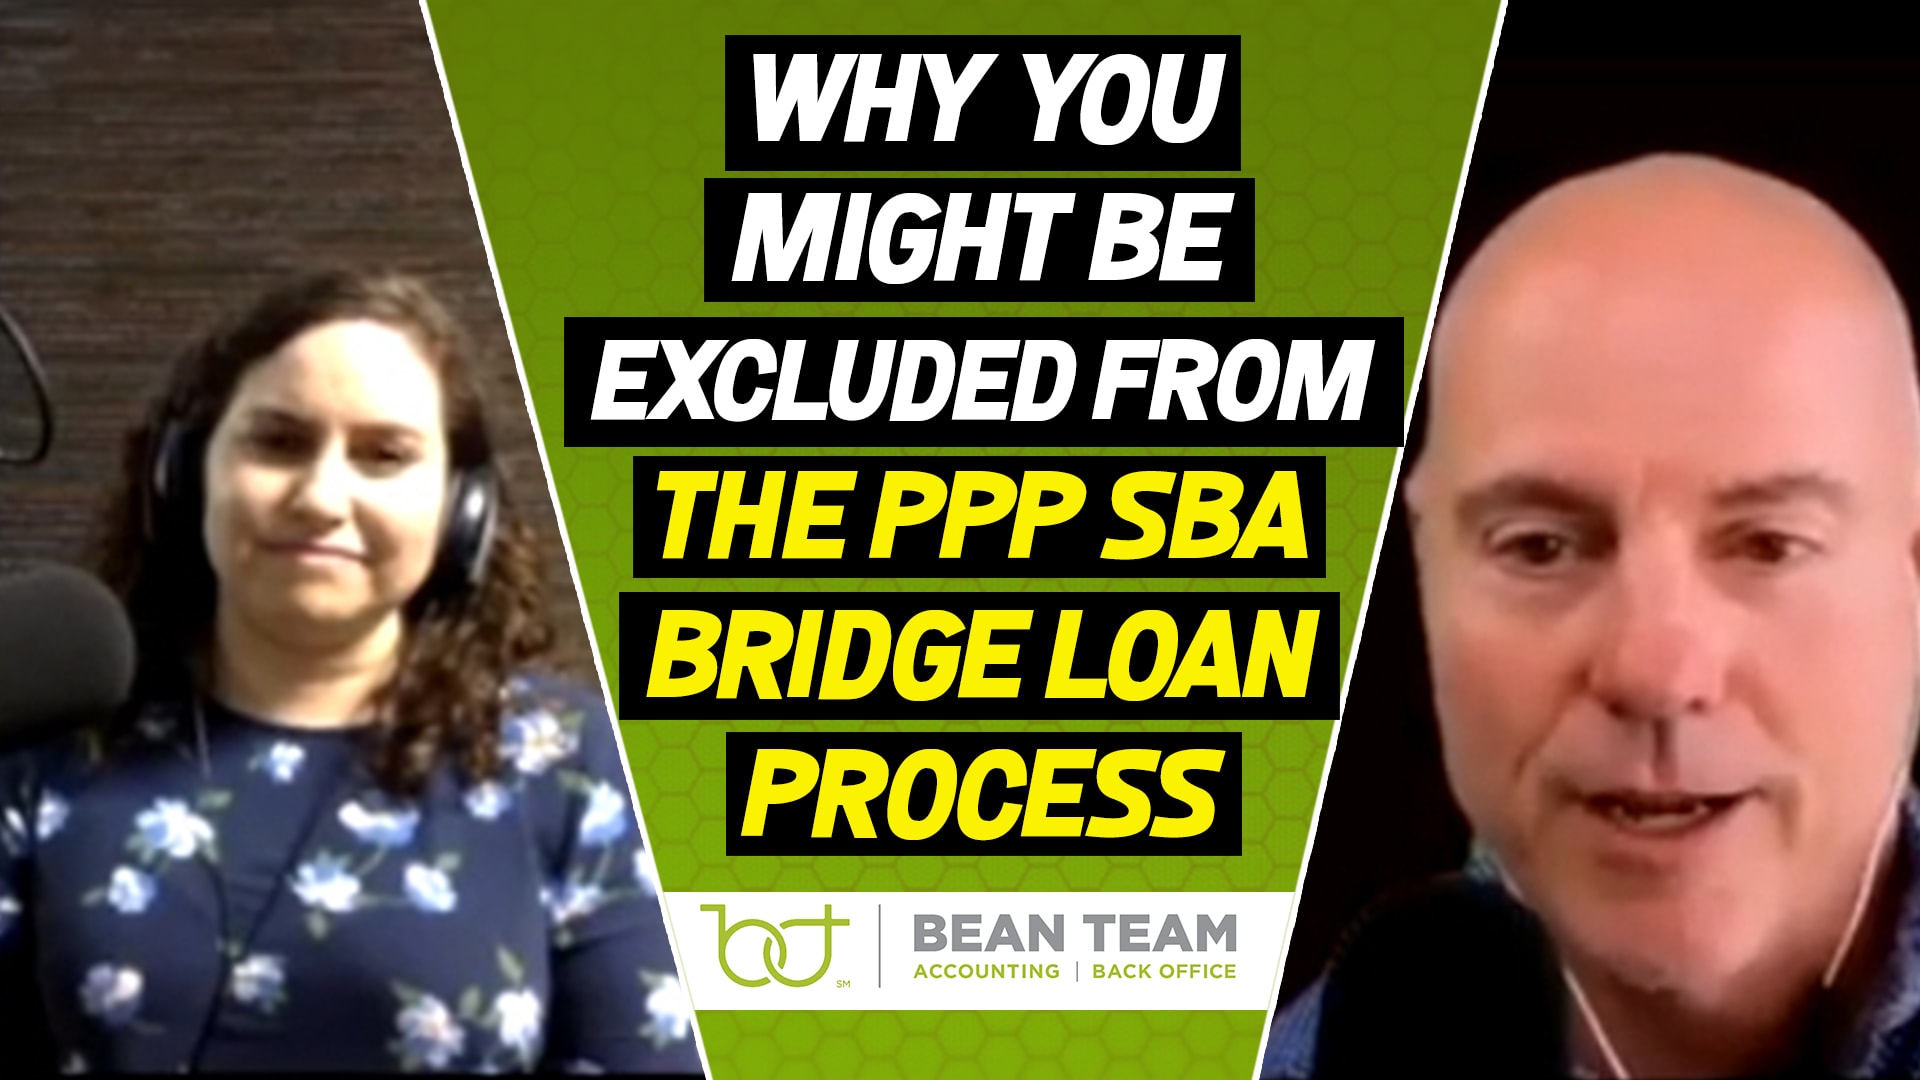 Why you might be excluded from the PPP SBA Bridge Loan Process funding